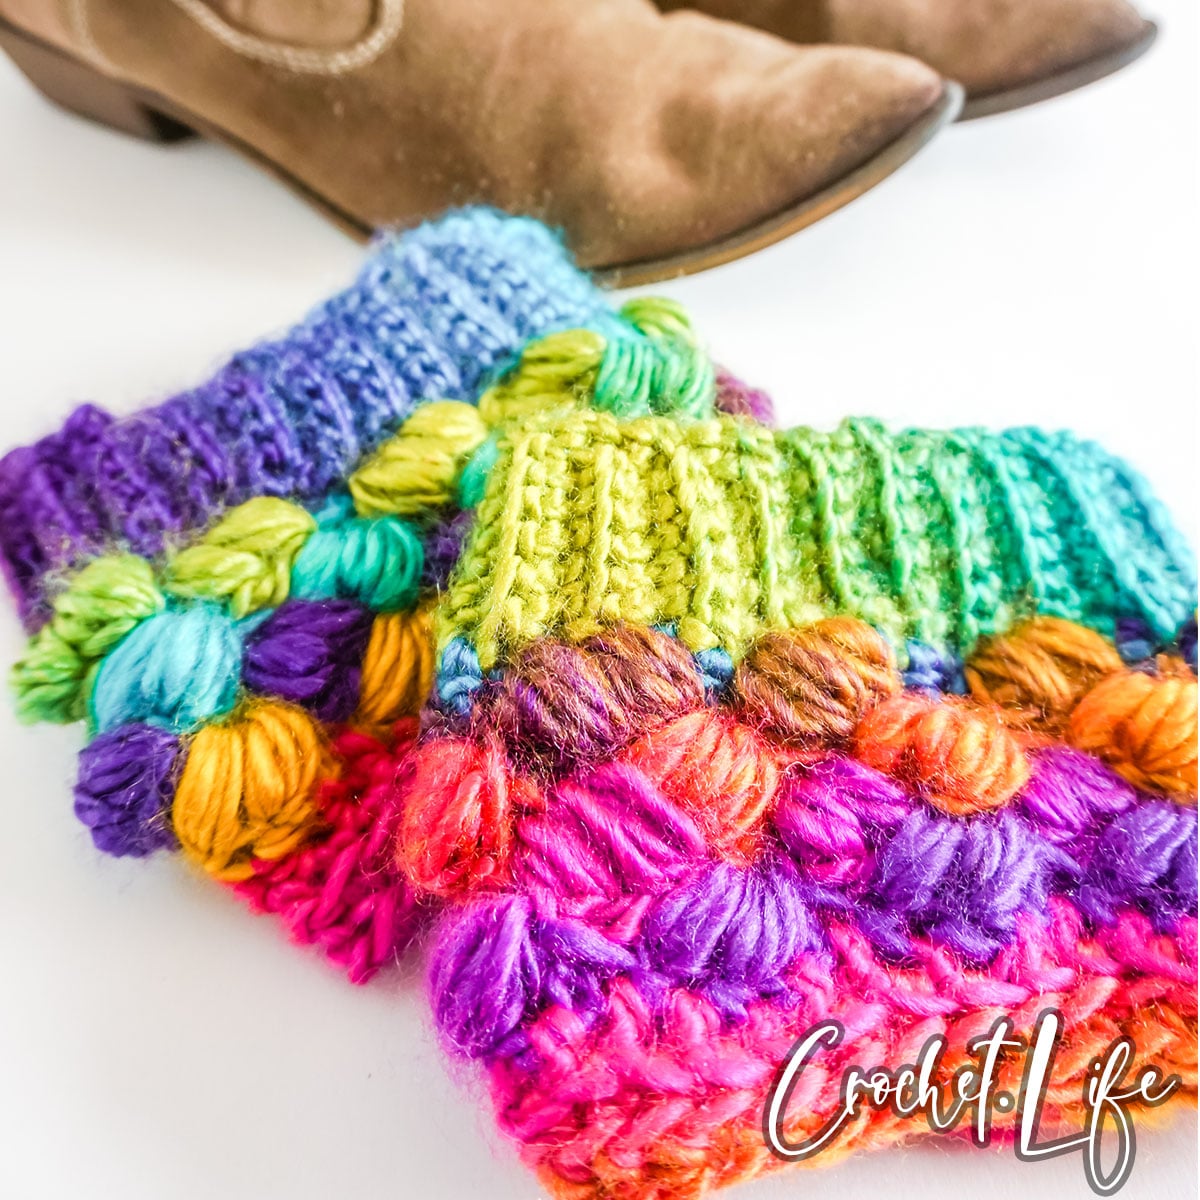 Multi-colored boot cuffs packed densely with different colored balls. Bright pink, purple, orange, yellow, and green make up the cuffs. 